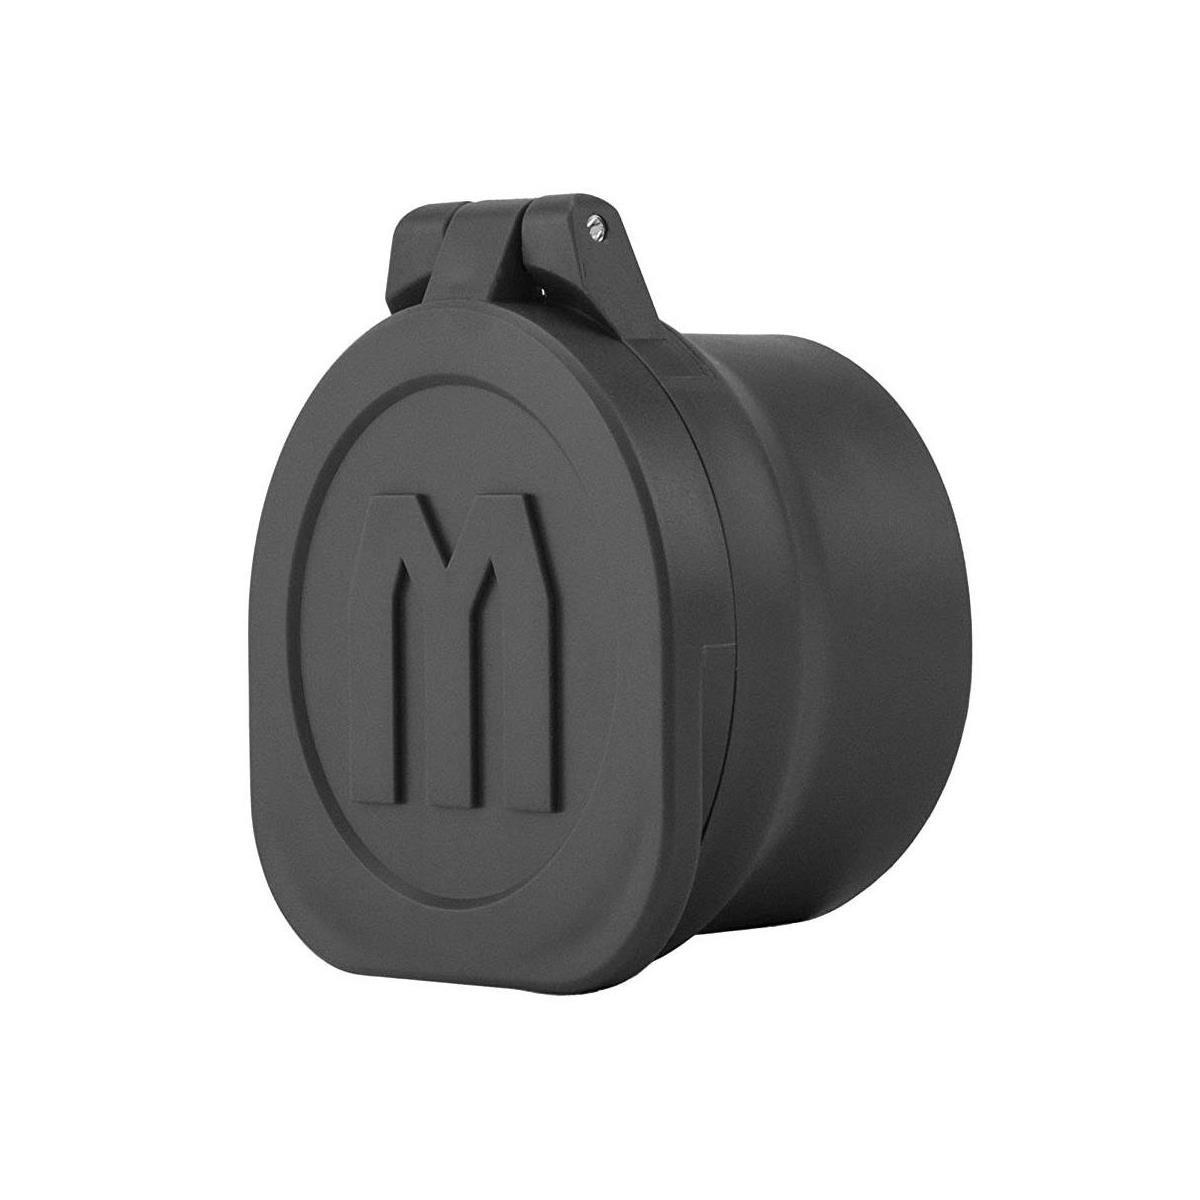 Image of Monstrum Tactical Rubberized Flip-Up Rifle Scope Lens Covers